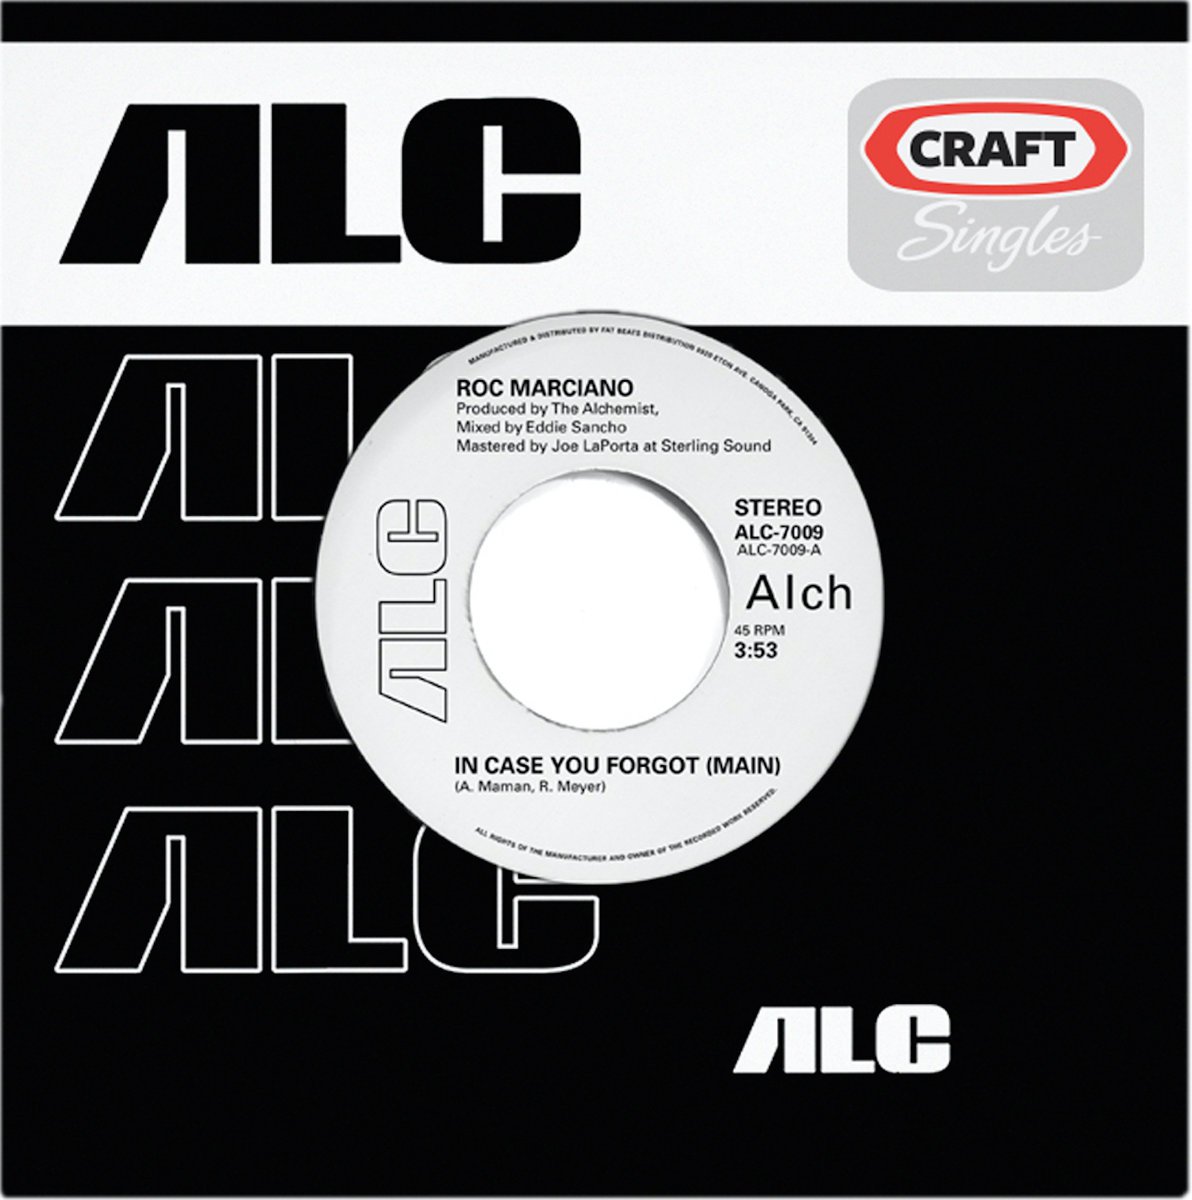 Roc Marciano & Alchemist Revisit The Craft 45 Series With “In Case You Forgot”